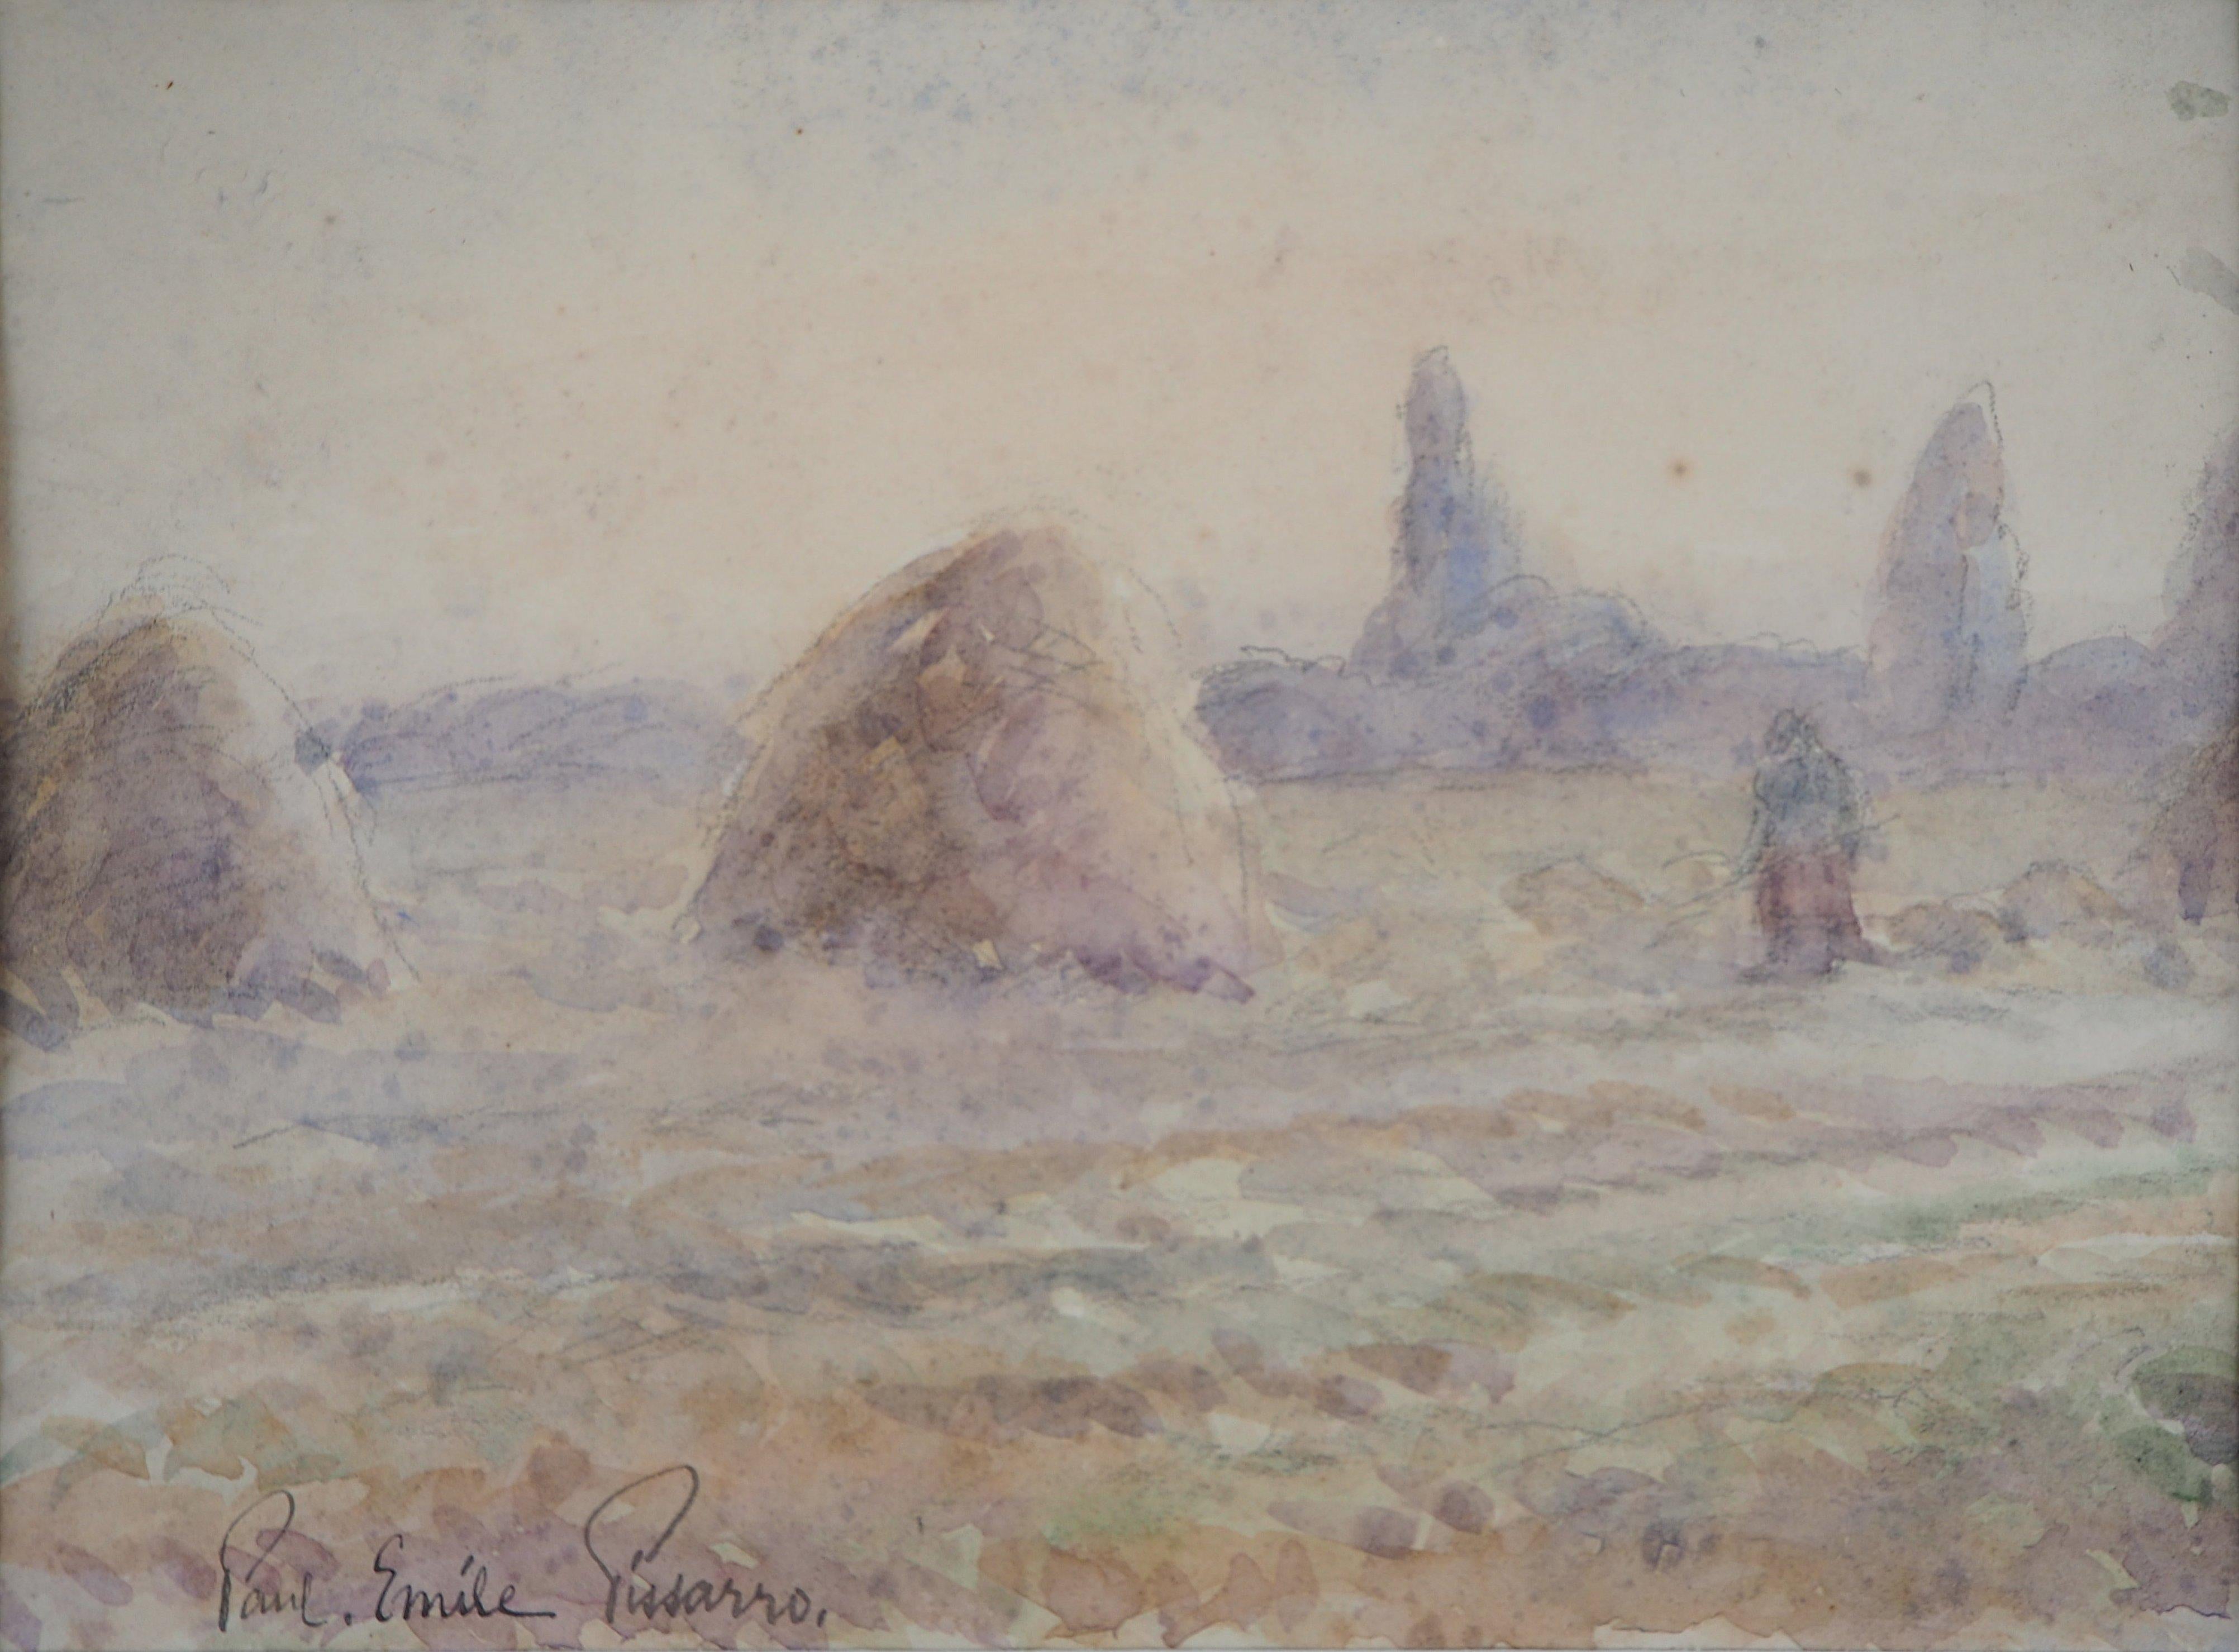 Tribute to Monet : Haystacks and Harvest - Original watercolor painting - Signed - Impressionist Art by Paul Emile Pissarro